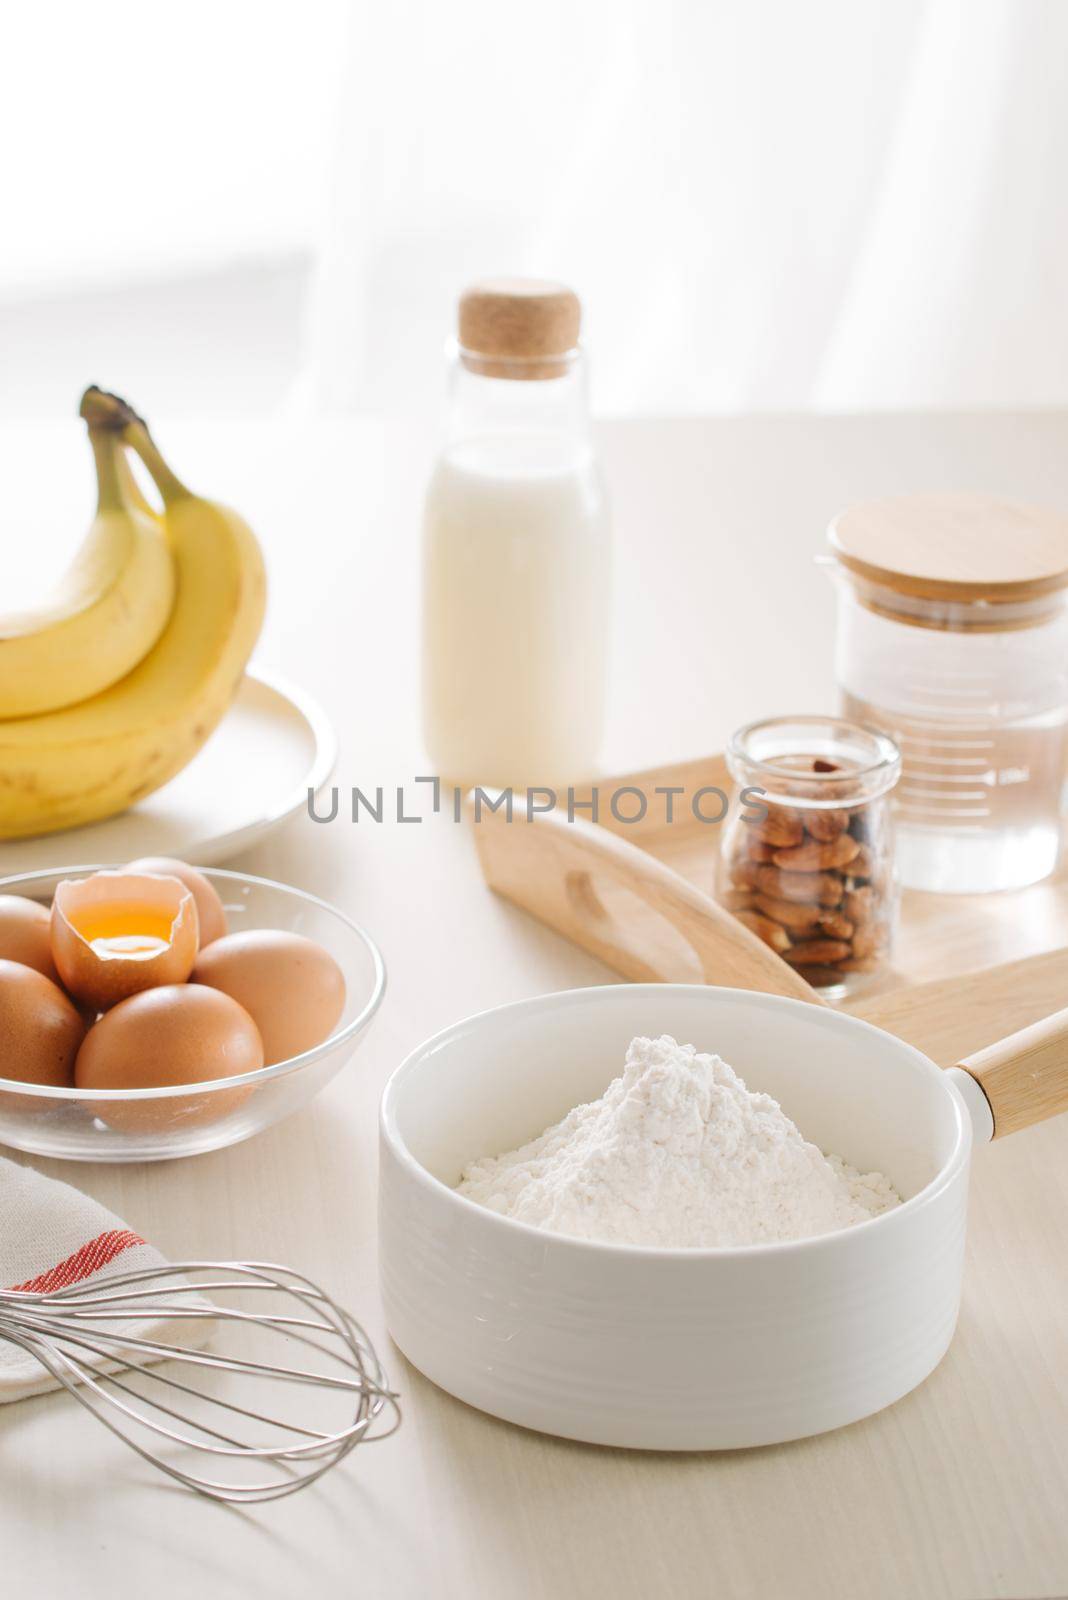 ingredients and tools to make a cake, flour, butter, sugar,eggs by makidotvn